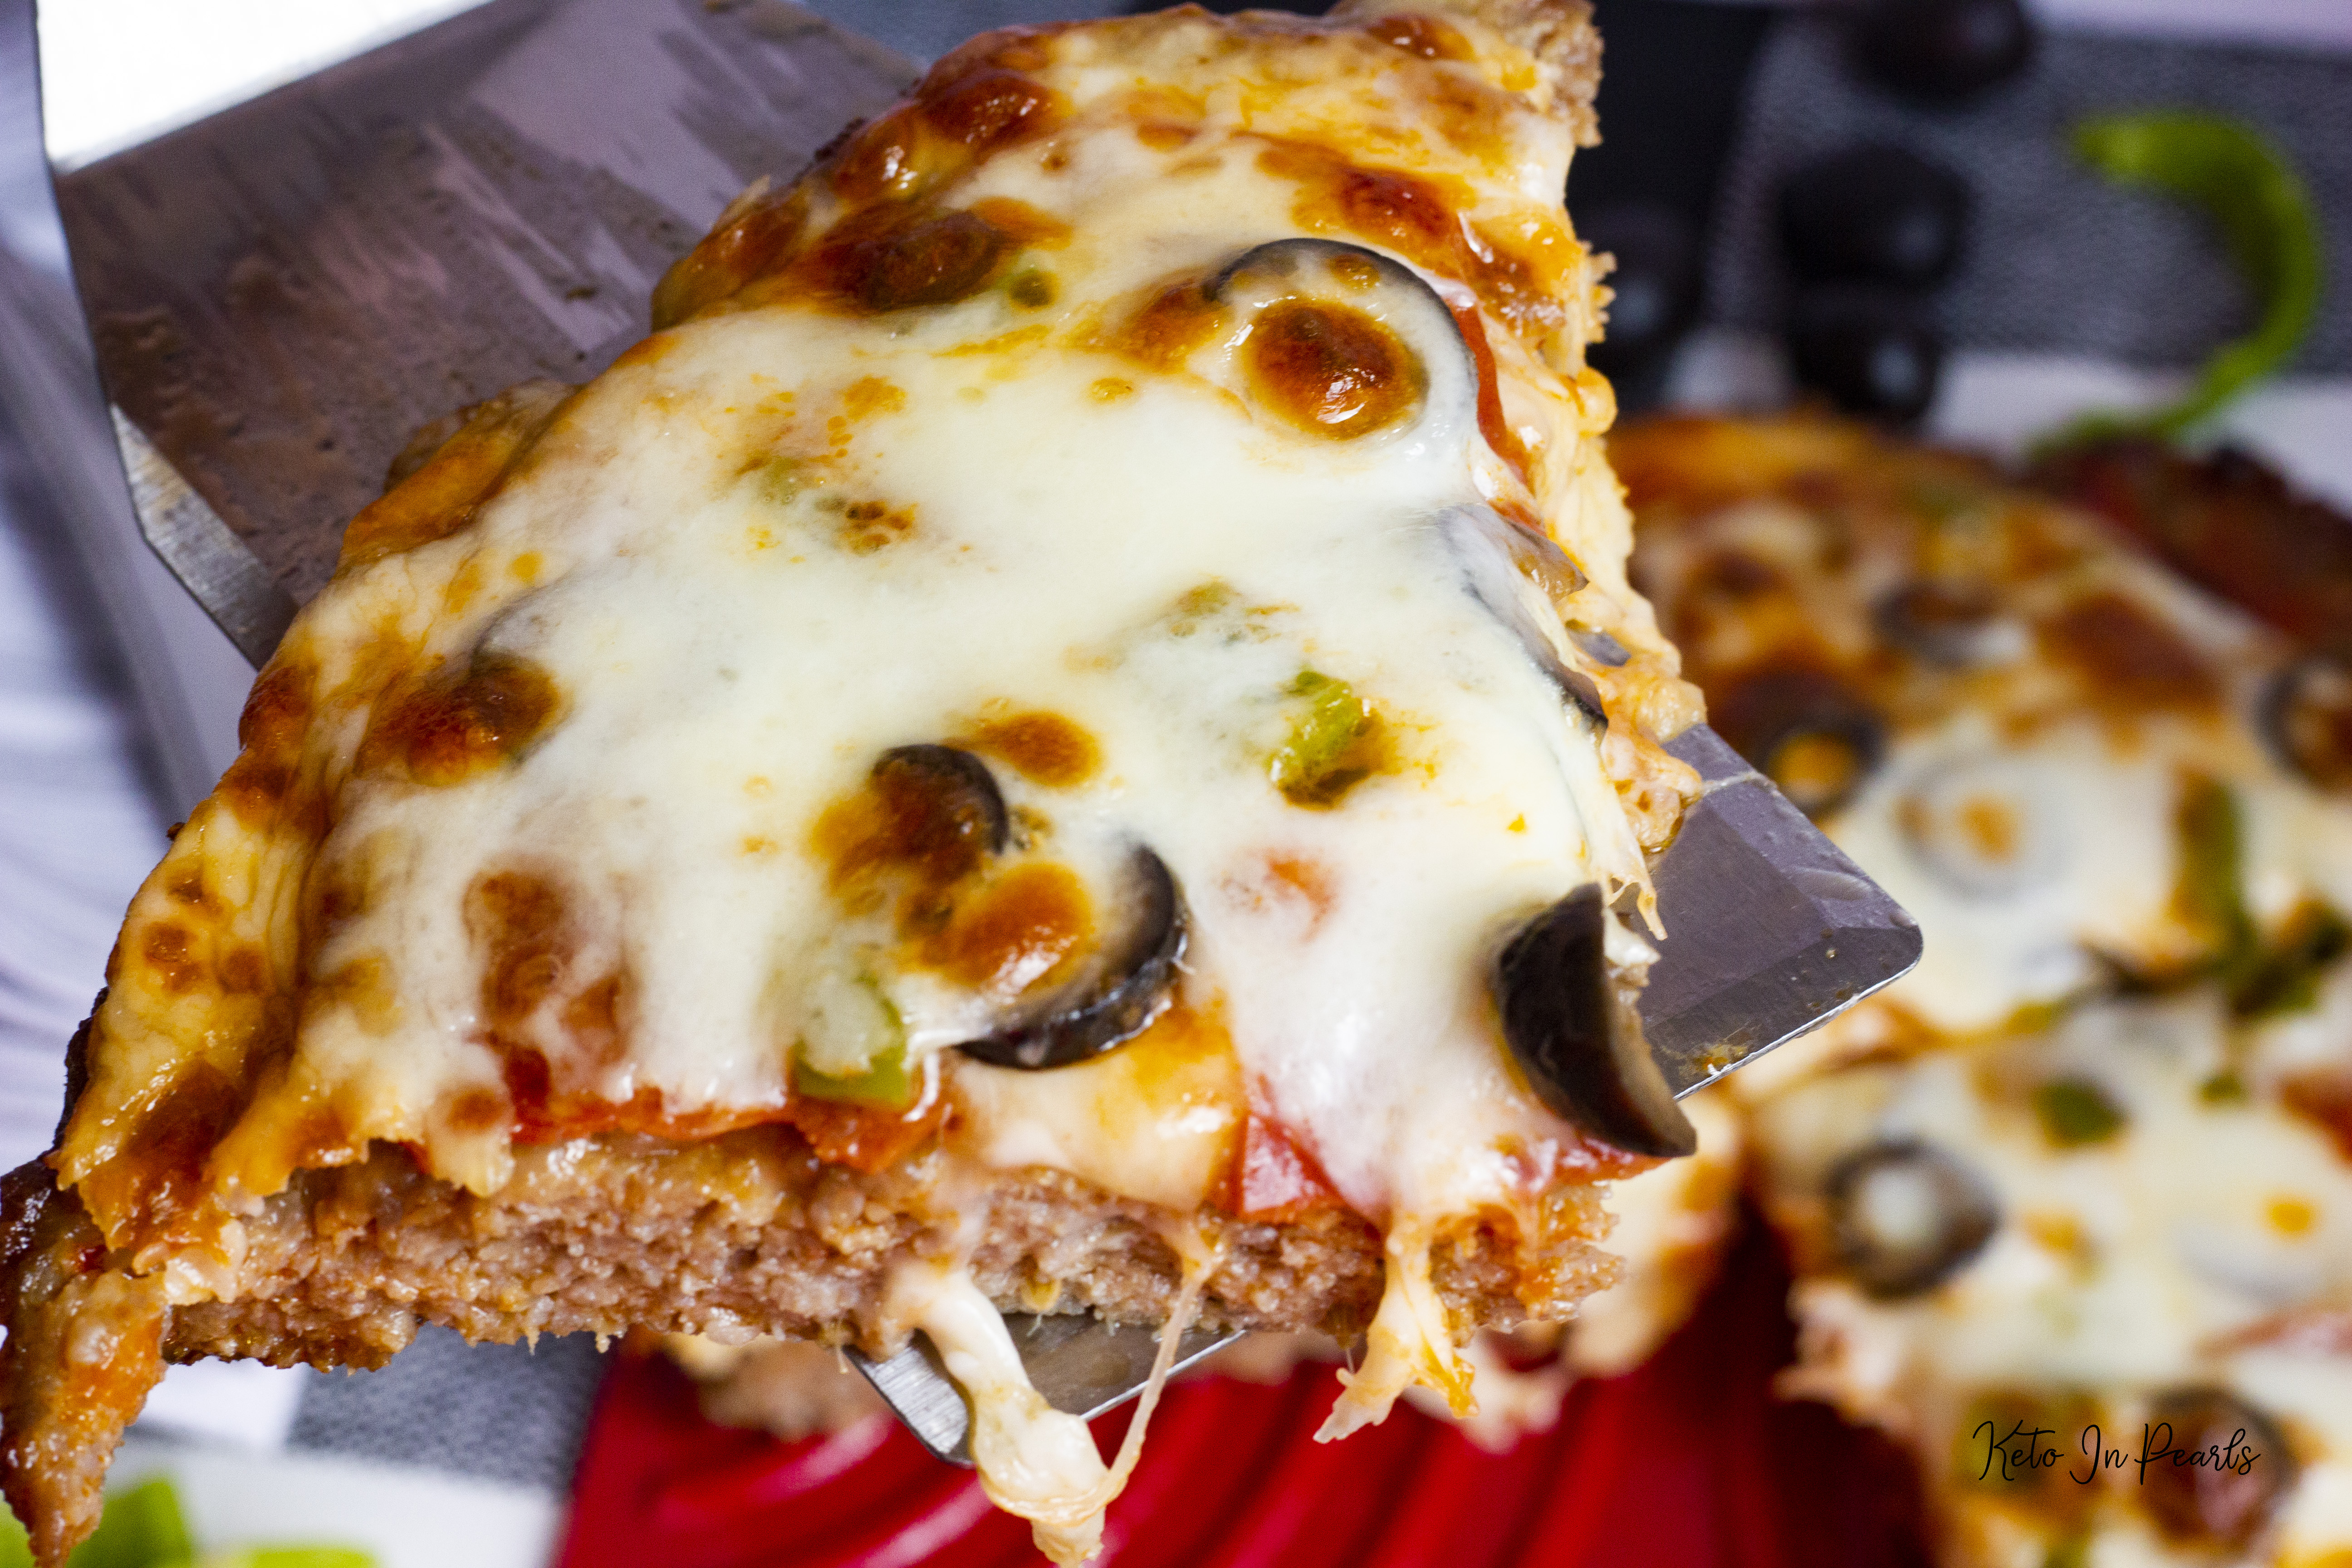 Crustless meat lovers keto pizza ready in under 30 minutes. Grain free, nut free, carnivore friendly, low carb, and keto friendly. 